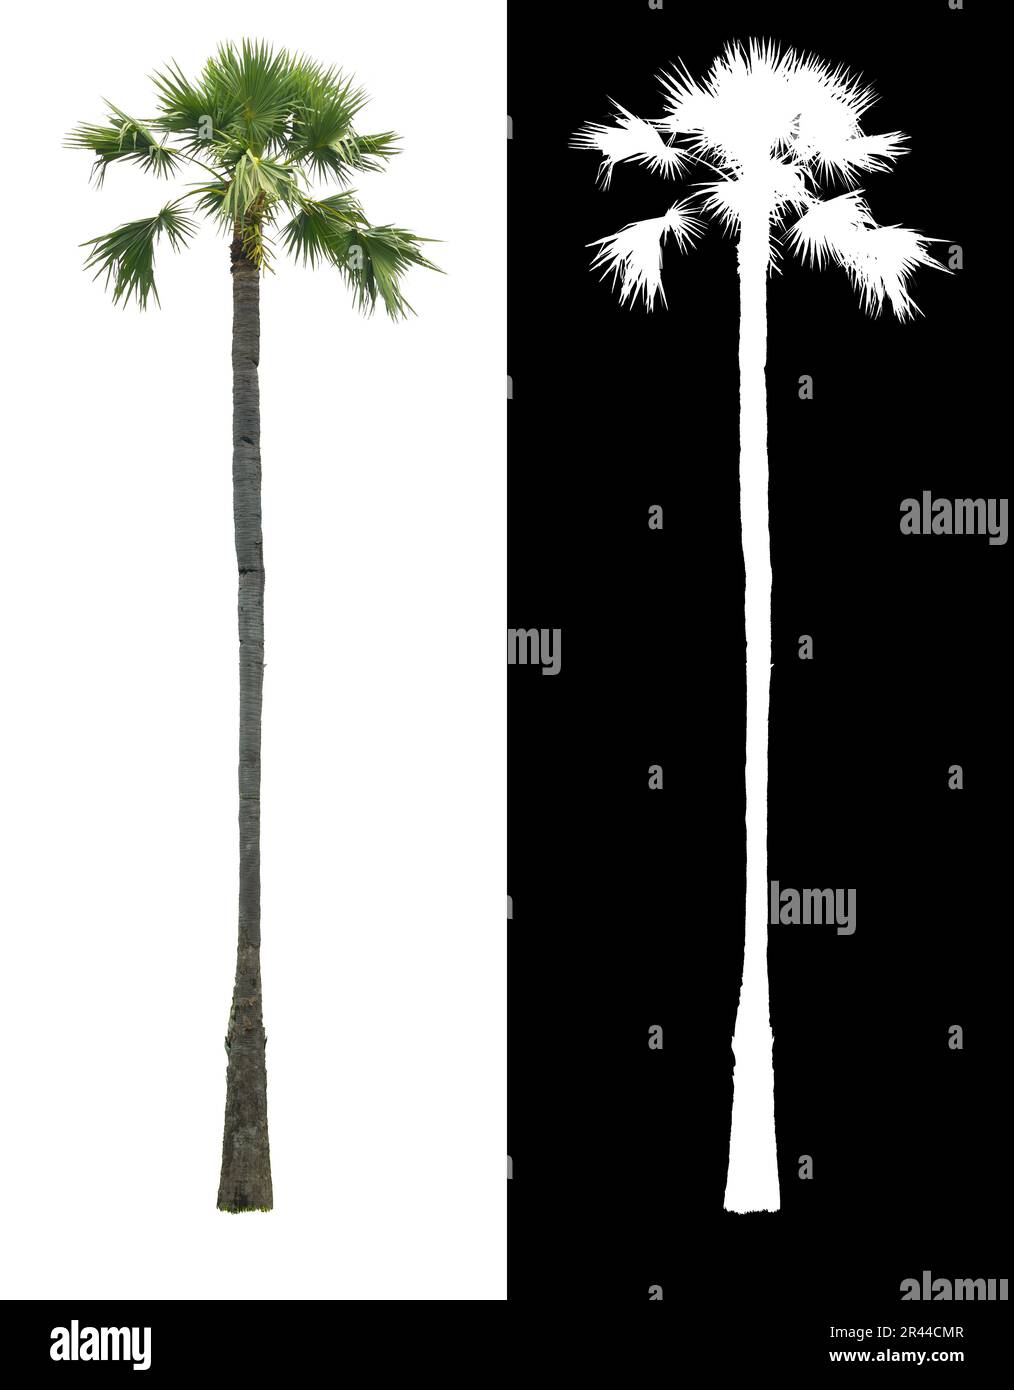 Asian Thai high Palm tree or Sugar palm tree, Toddy palm isolated on white background with alpha channel shadow split. Stock Photo